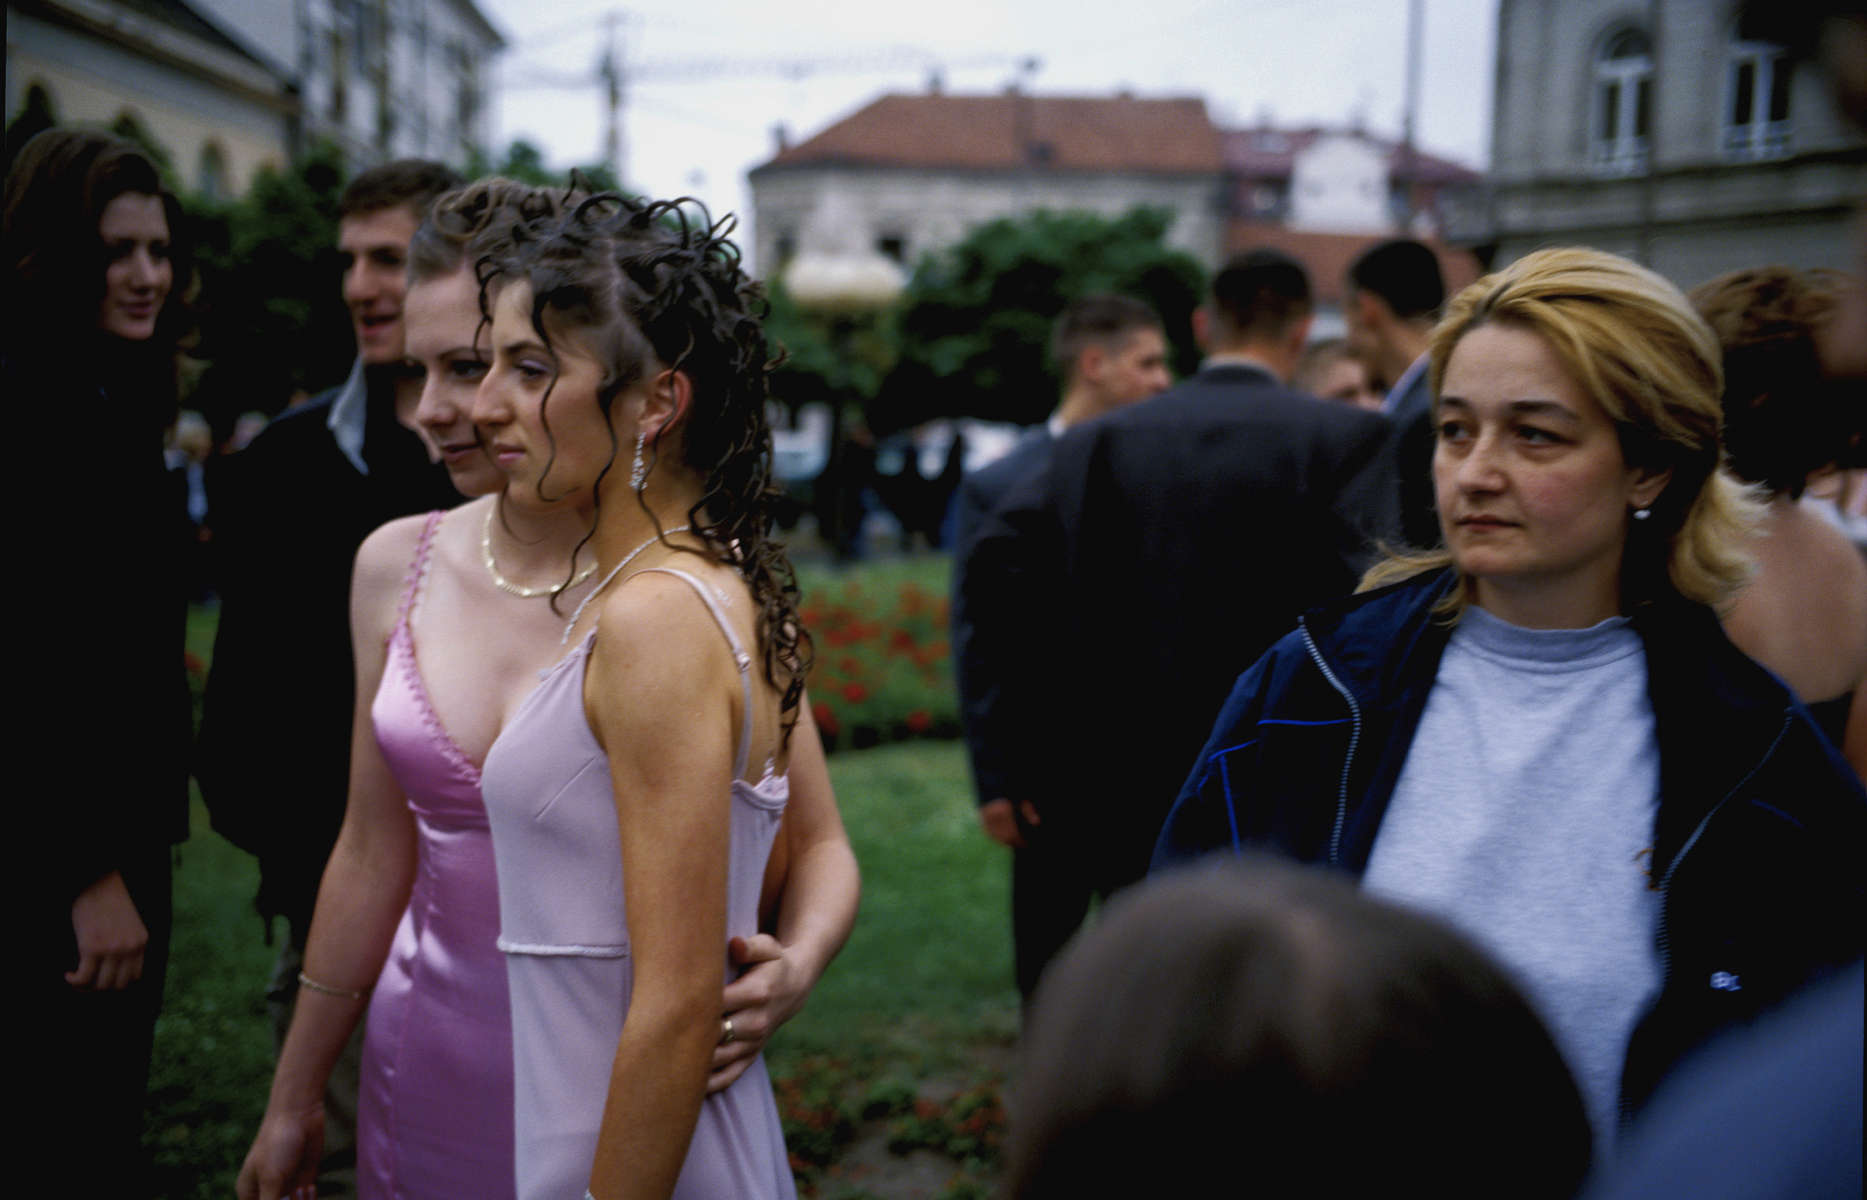 High school girls pose for a picture on prom night in the town of Bjeljina, where \{quote}ethnic cleansing\{quote} began in April 1992. Serbian paramilitary forces and local Serbs attacked the city\'s Muslim community, killing some 500 people and forcing the rest of the Muslim population to flee. Few Muslims have returned to the city, which is in the northeastern part of the country, along the border with Serbia.